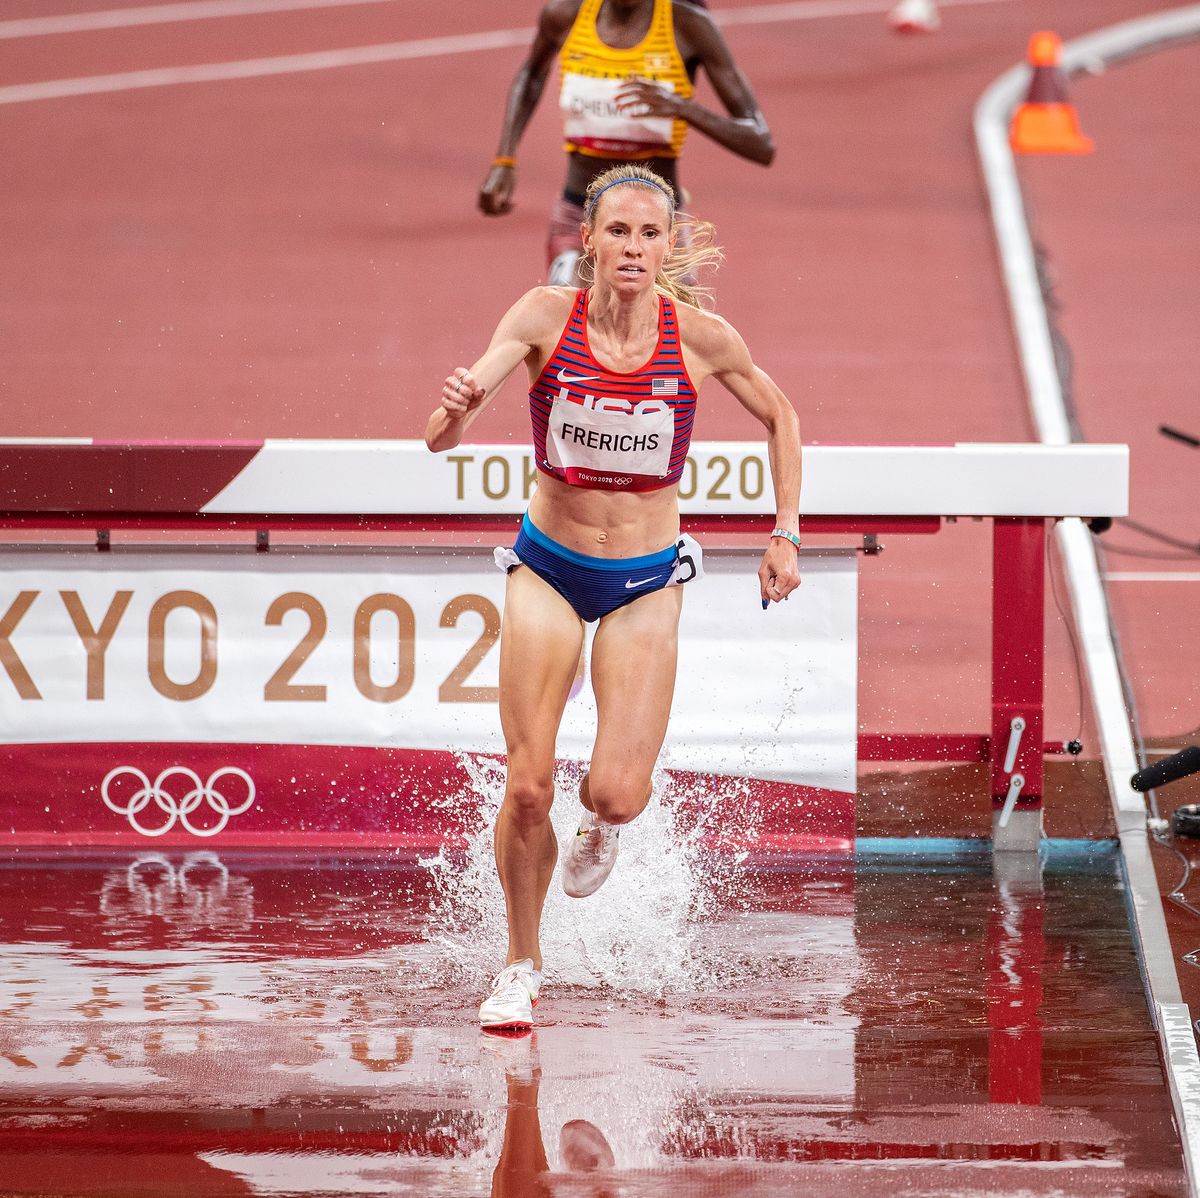 Courtney Frerichs - How the Steeplechaser Had Her Best Track